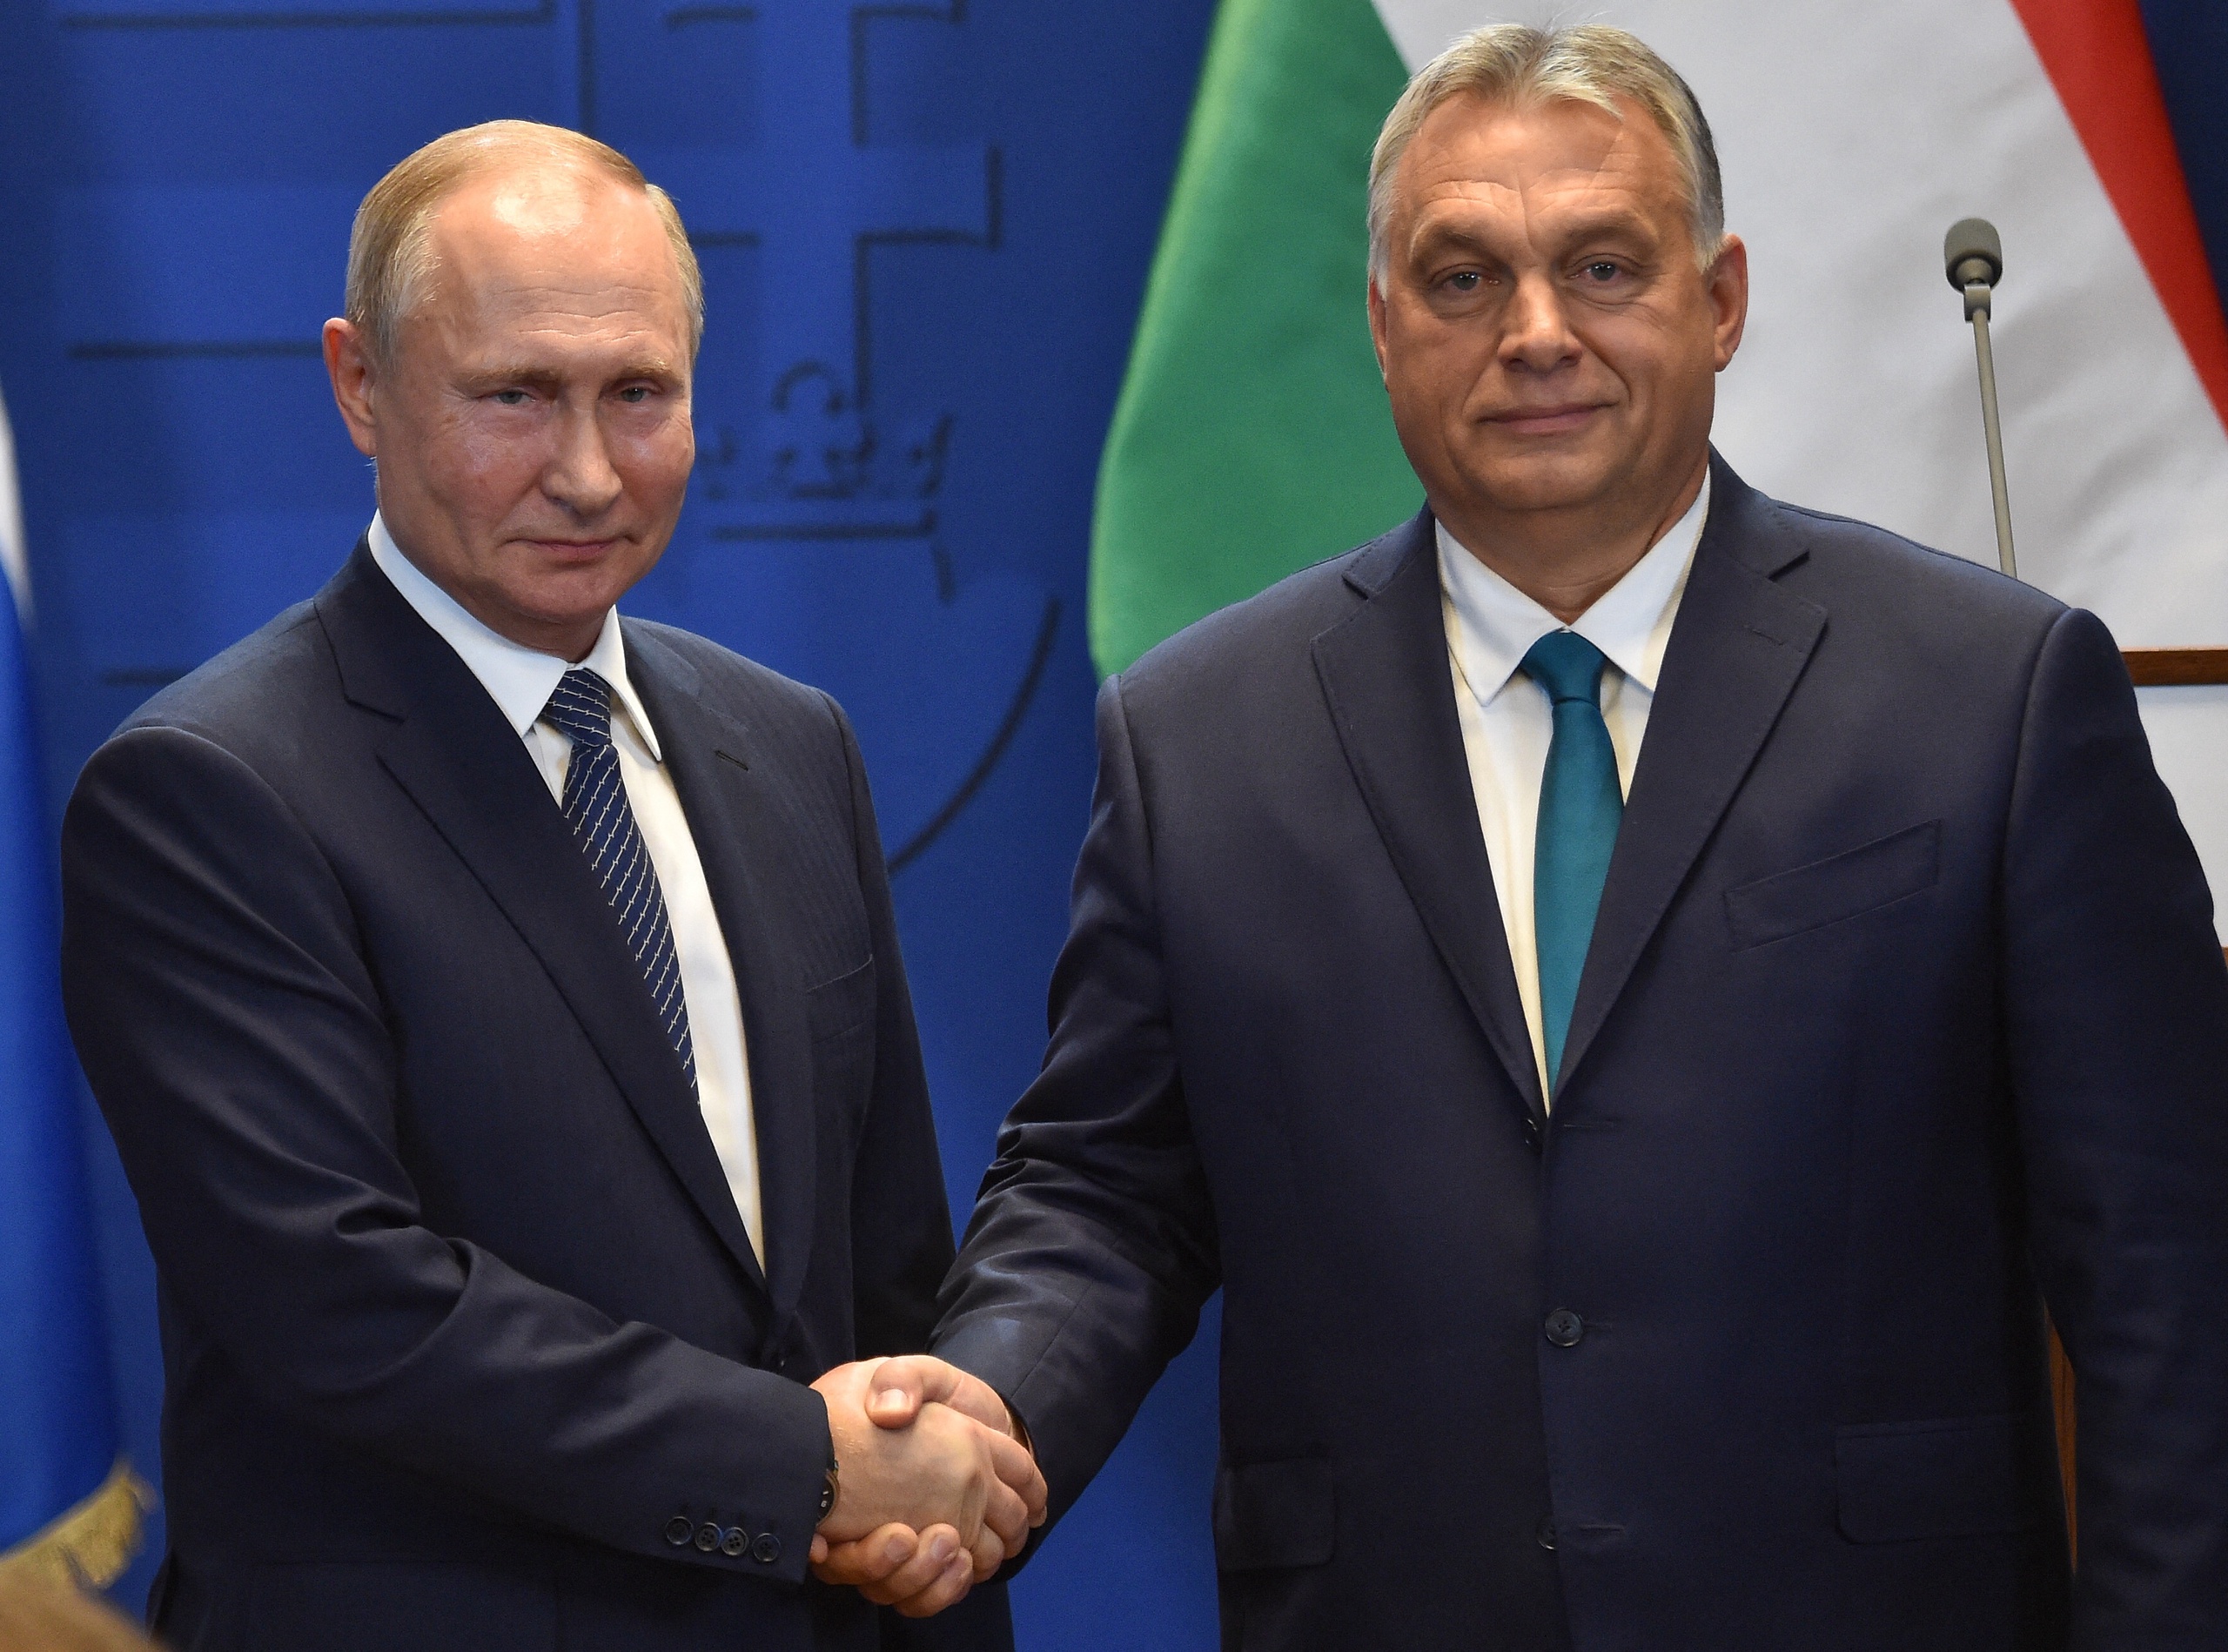 Hungarian Prime Minister Viktor Orban during a meeting with Russian President Vladimir Putin in 2019.